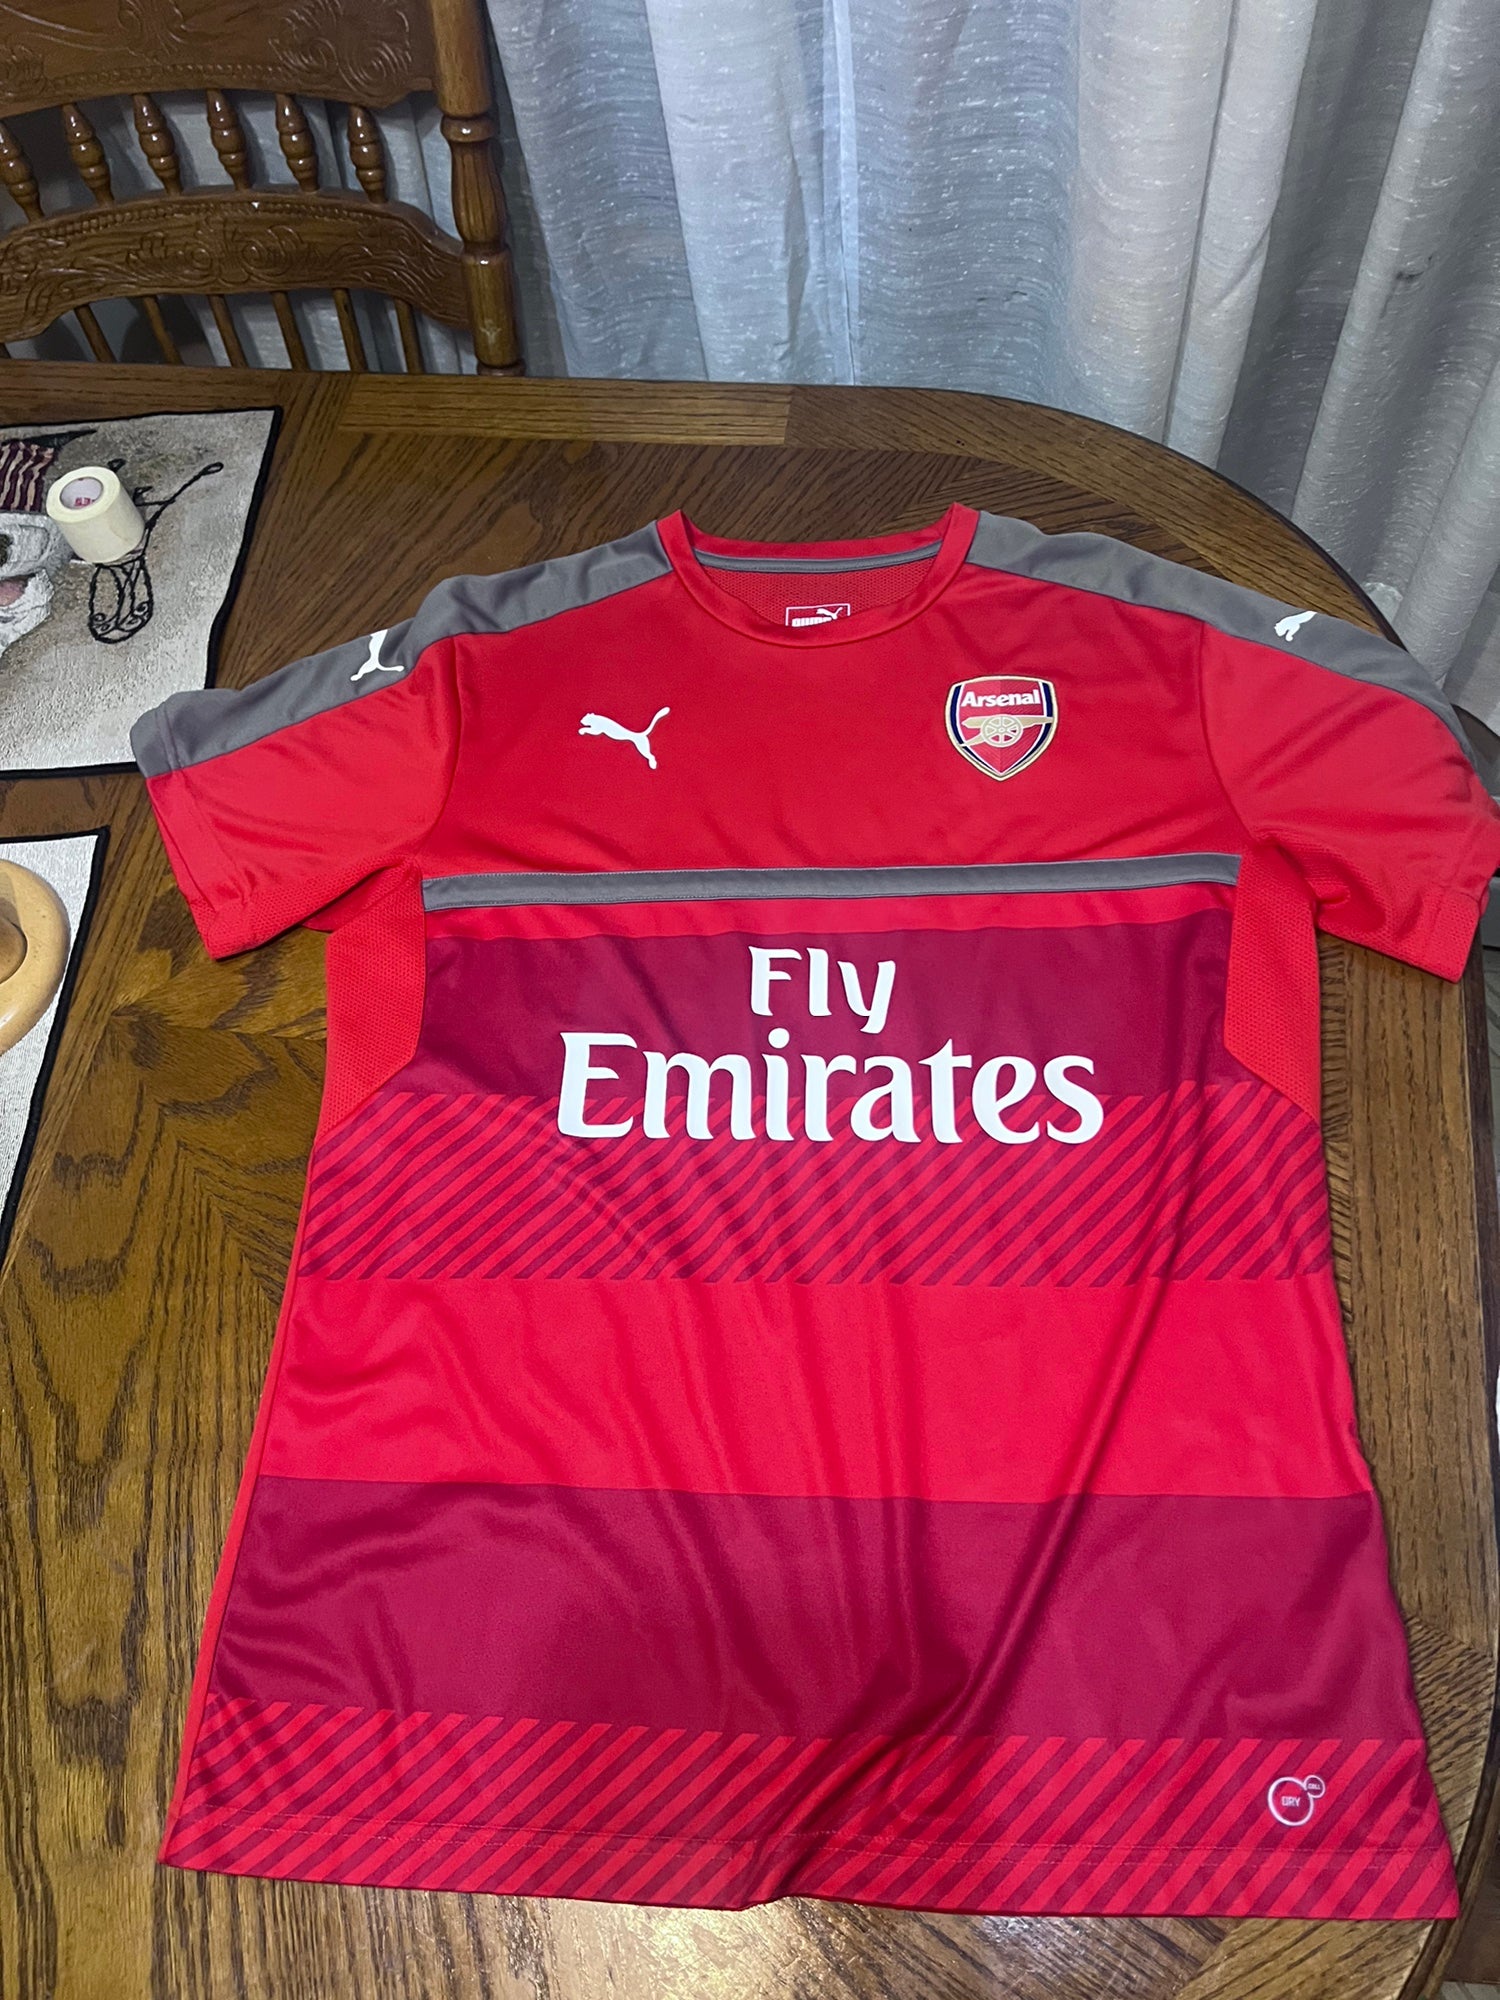 enclose To construct Assumptions, assumptions. Guess Puma Arsenal Fly Emirates Soccer Jersey Size XL Fits Large | SidelineSwap